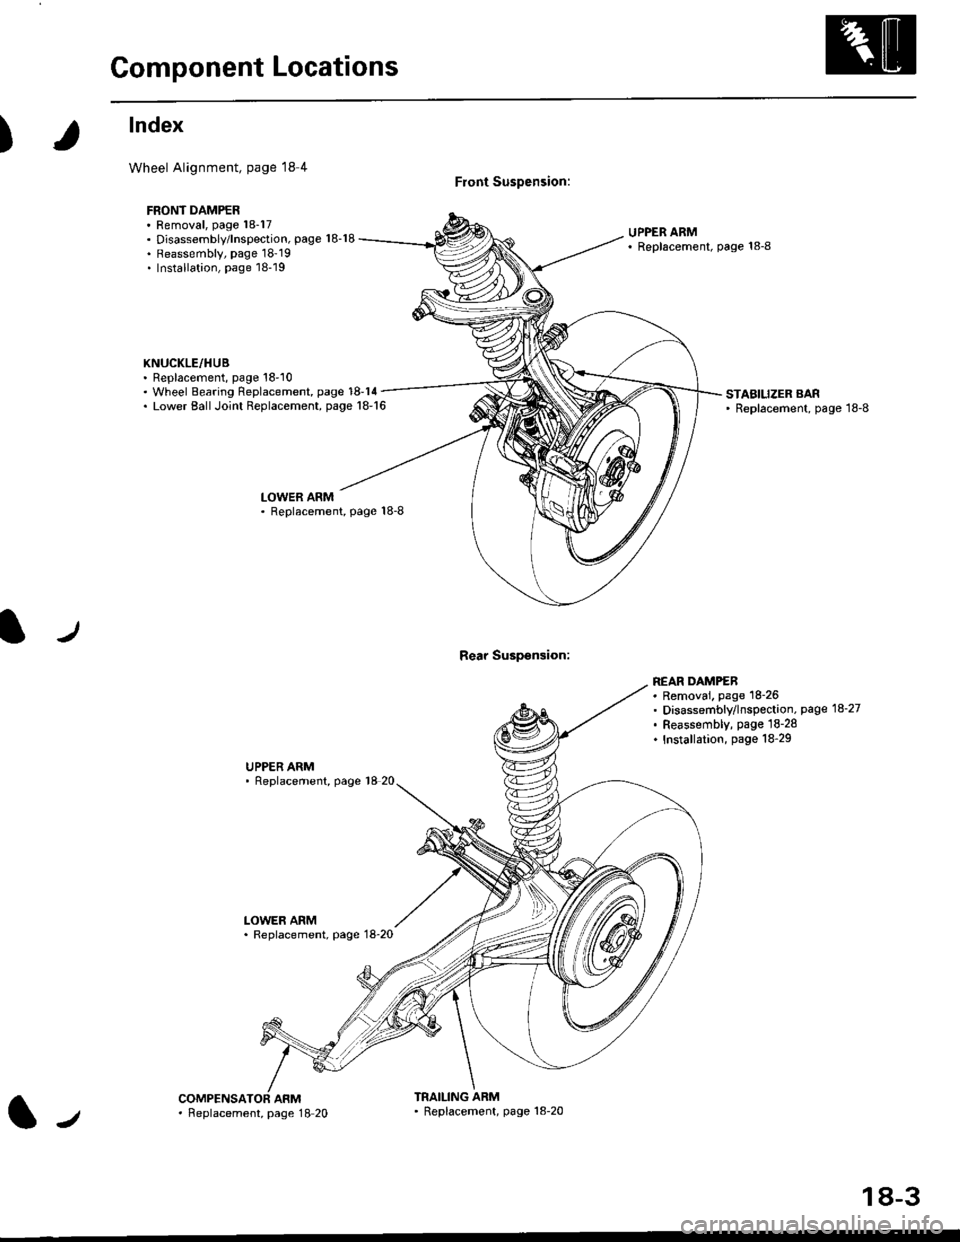 HONDA CIVIC 1996 6.G Workshop Manual Component Locations
)
lndex
Wheel Alignment, page l8 4
FBONT DAMPER. Removal, page 18-17. Disassembly/lnspection, page 18-18. Reassembly, page 1819. Installation, page 18-19
KNUCKLE/HUB. Replacement,